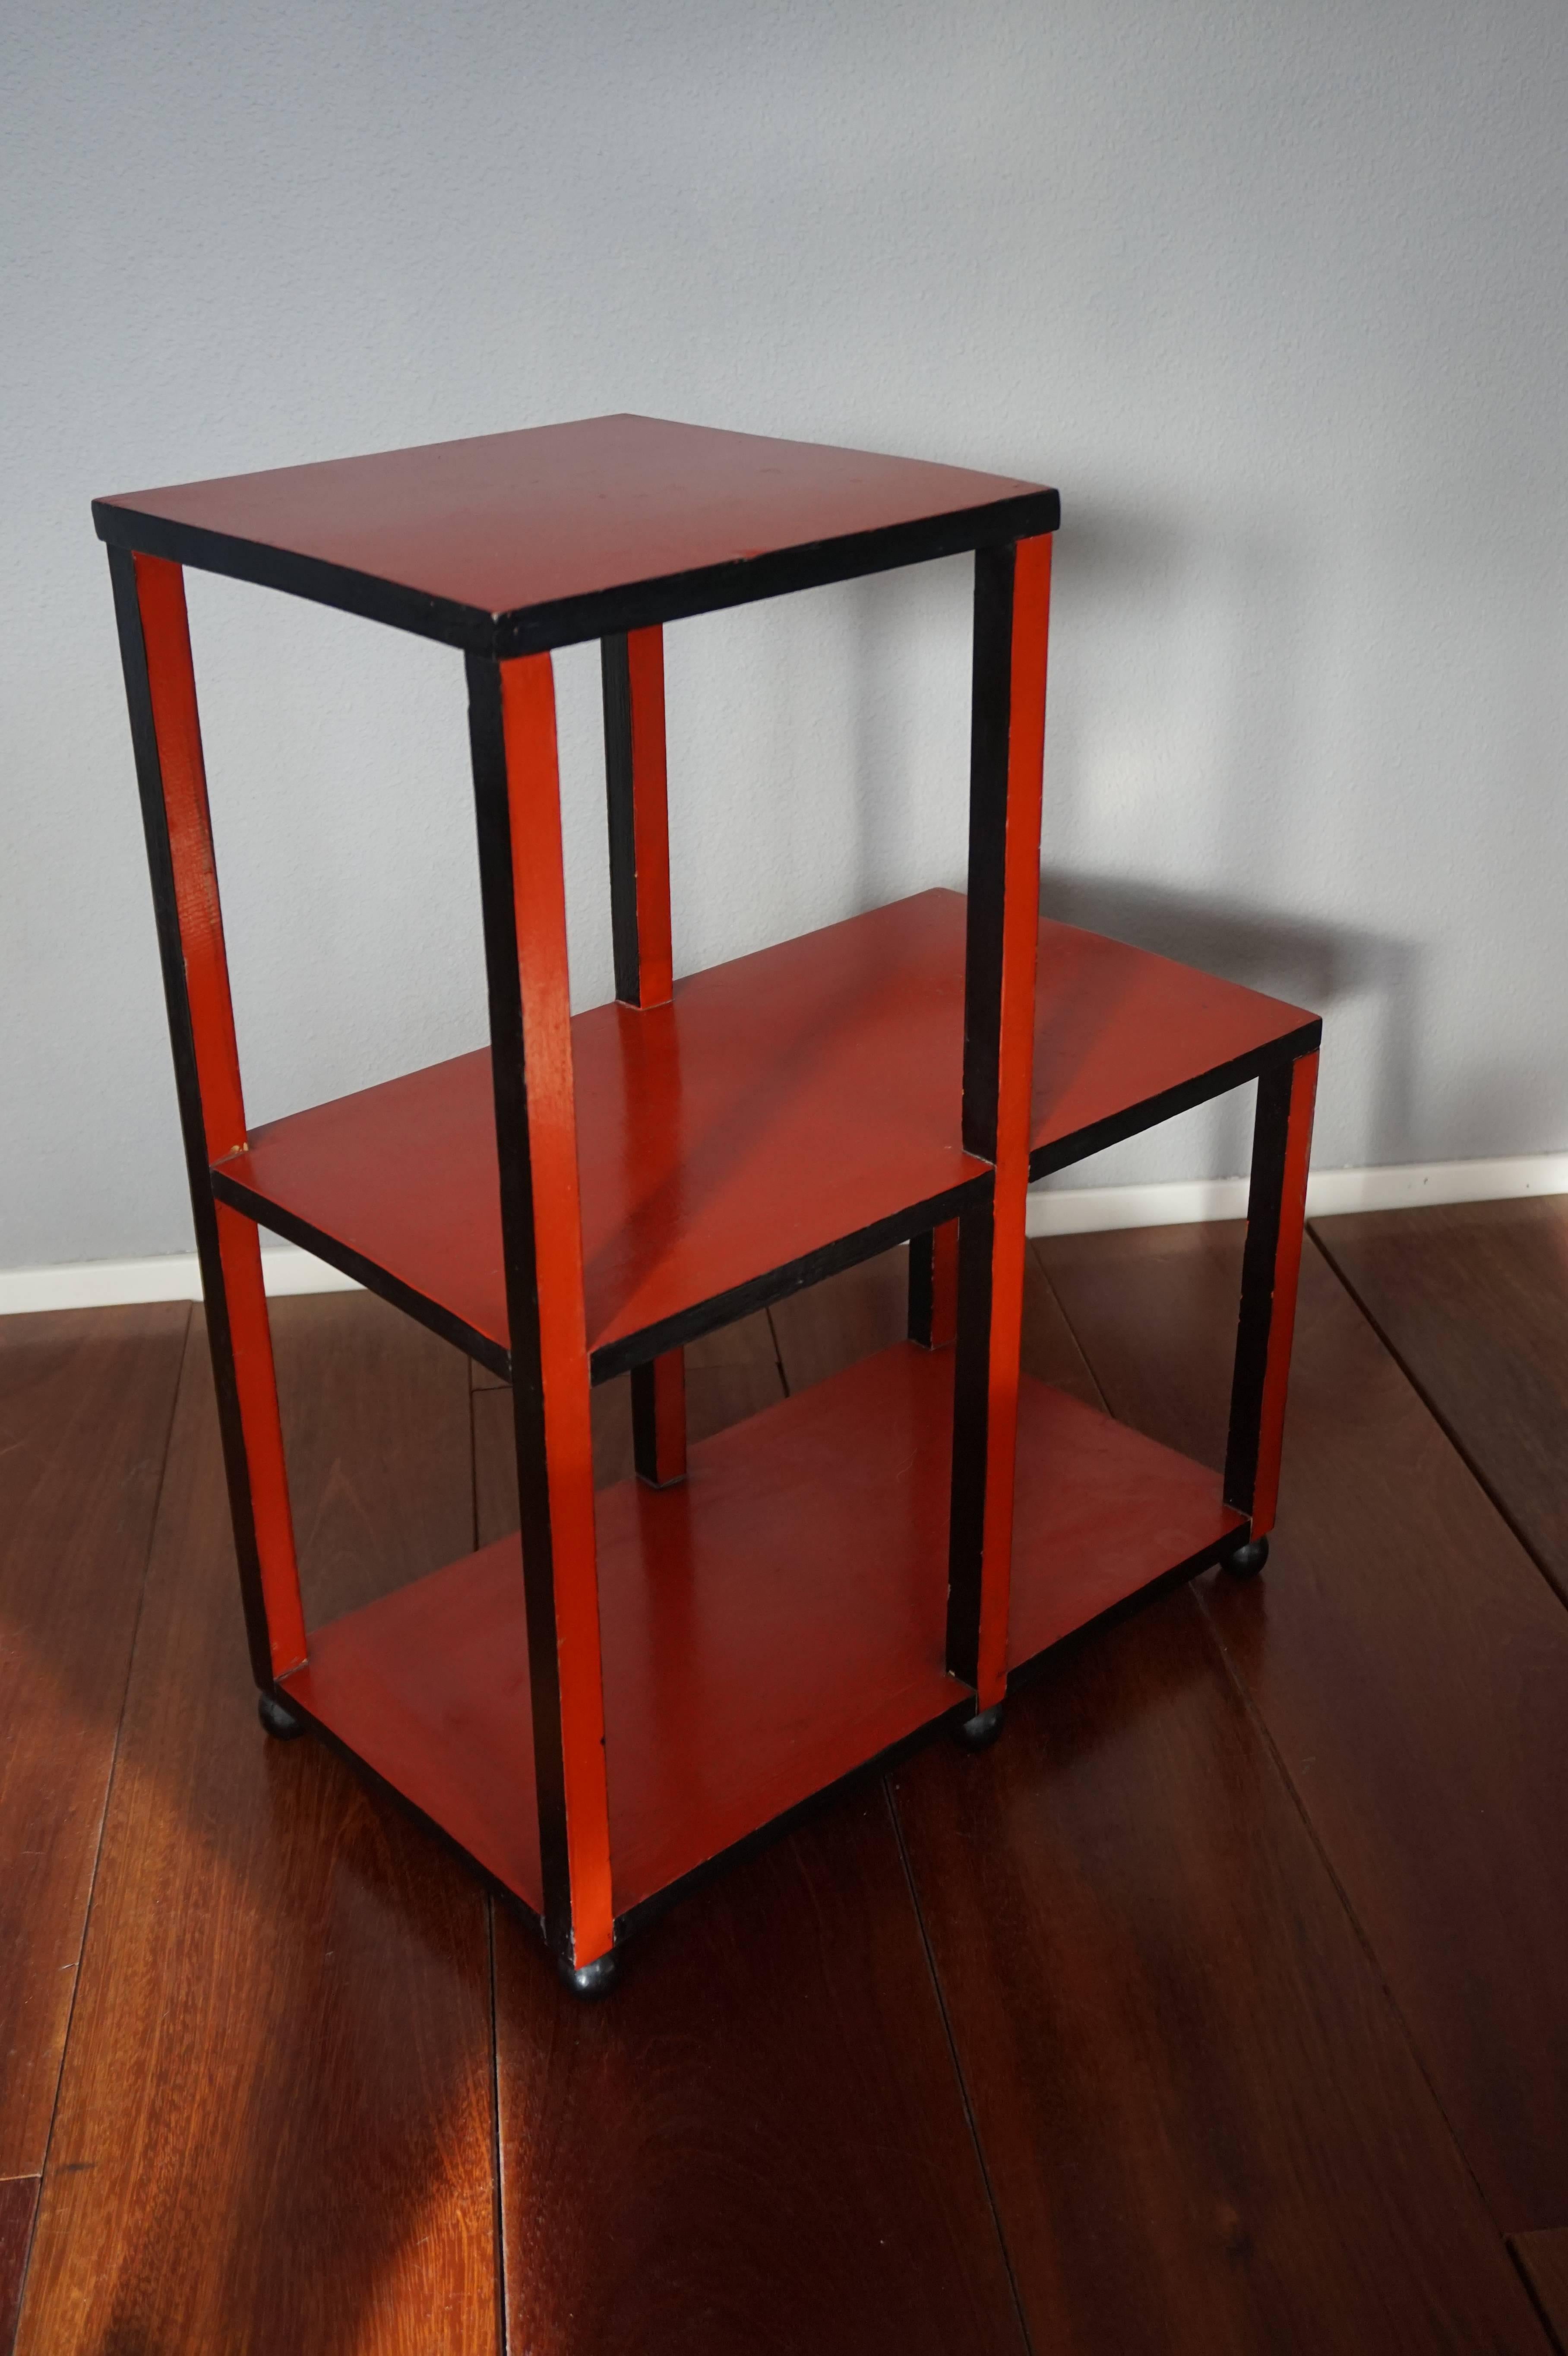 Original 1920s Art Deco display table.

If you have an eye for the rare and original then this little, avantgardistic etagere/stand from the early twenties will grab your attention. This angular, wooden table is lacquered on all sides and the